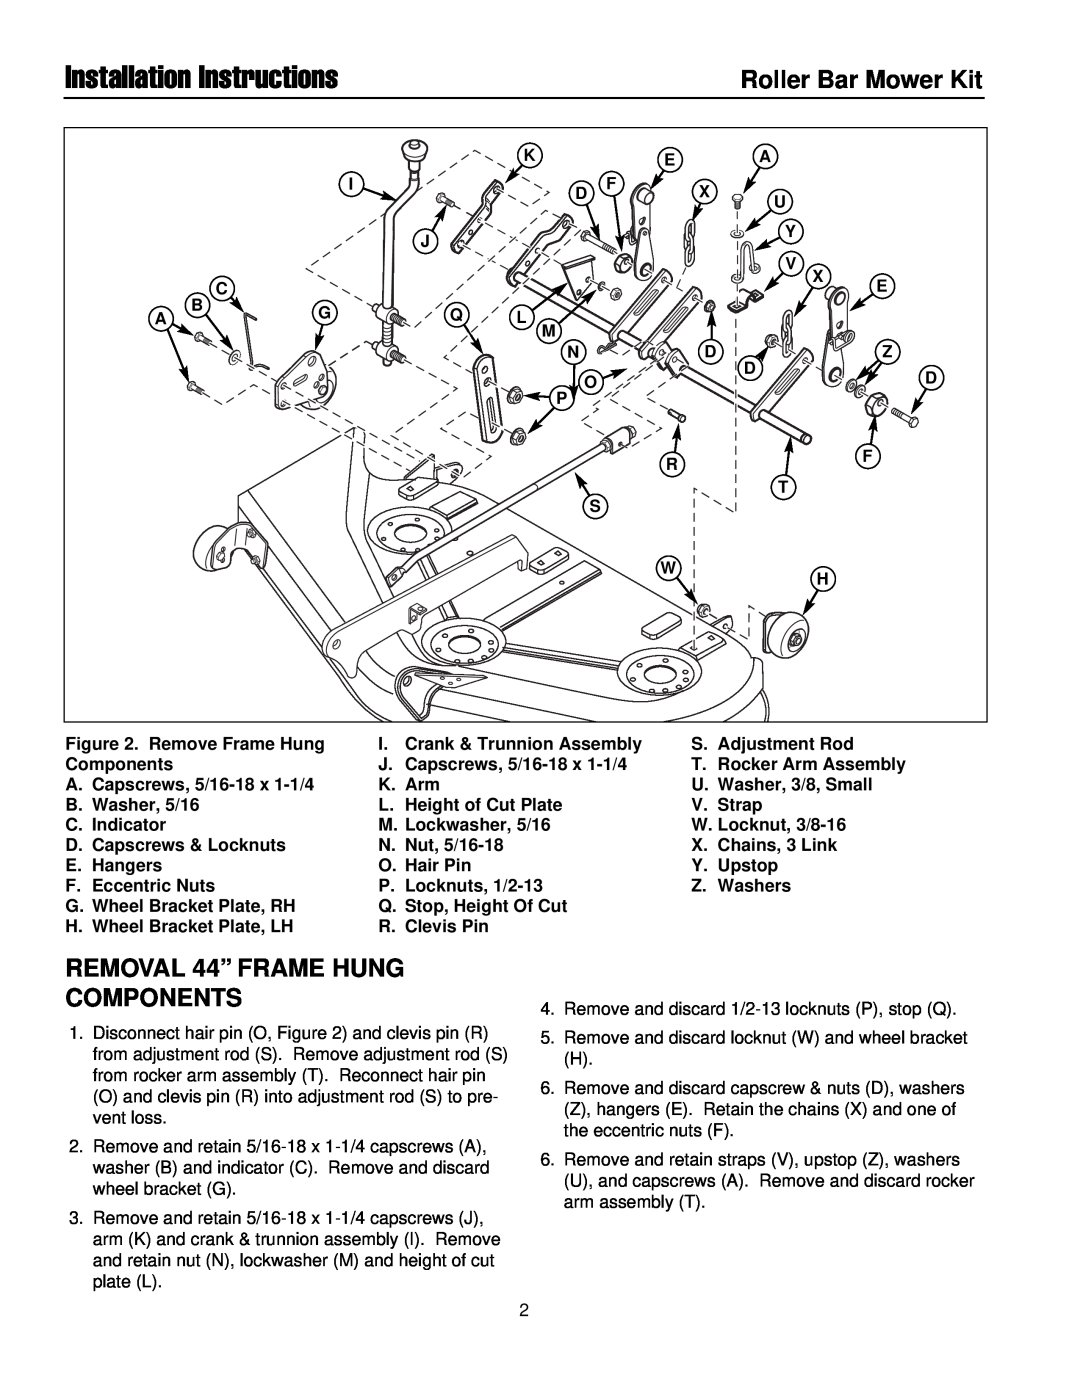 Briggs & Stratton 1687077 Installation Instructions, REMOVAL 44” FRAME HUNG COMPONENTS, Roller Bar Mower Kit 